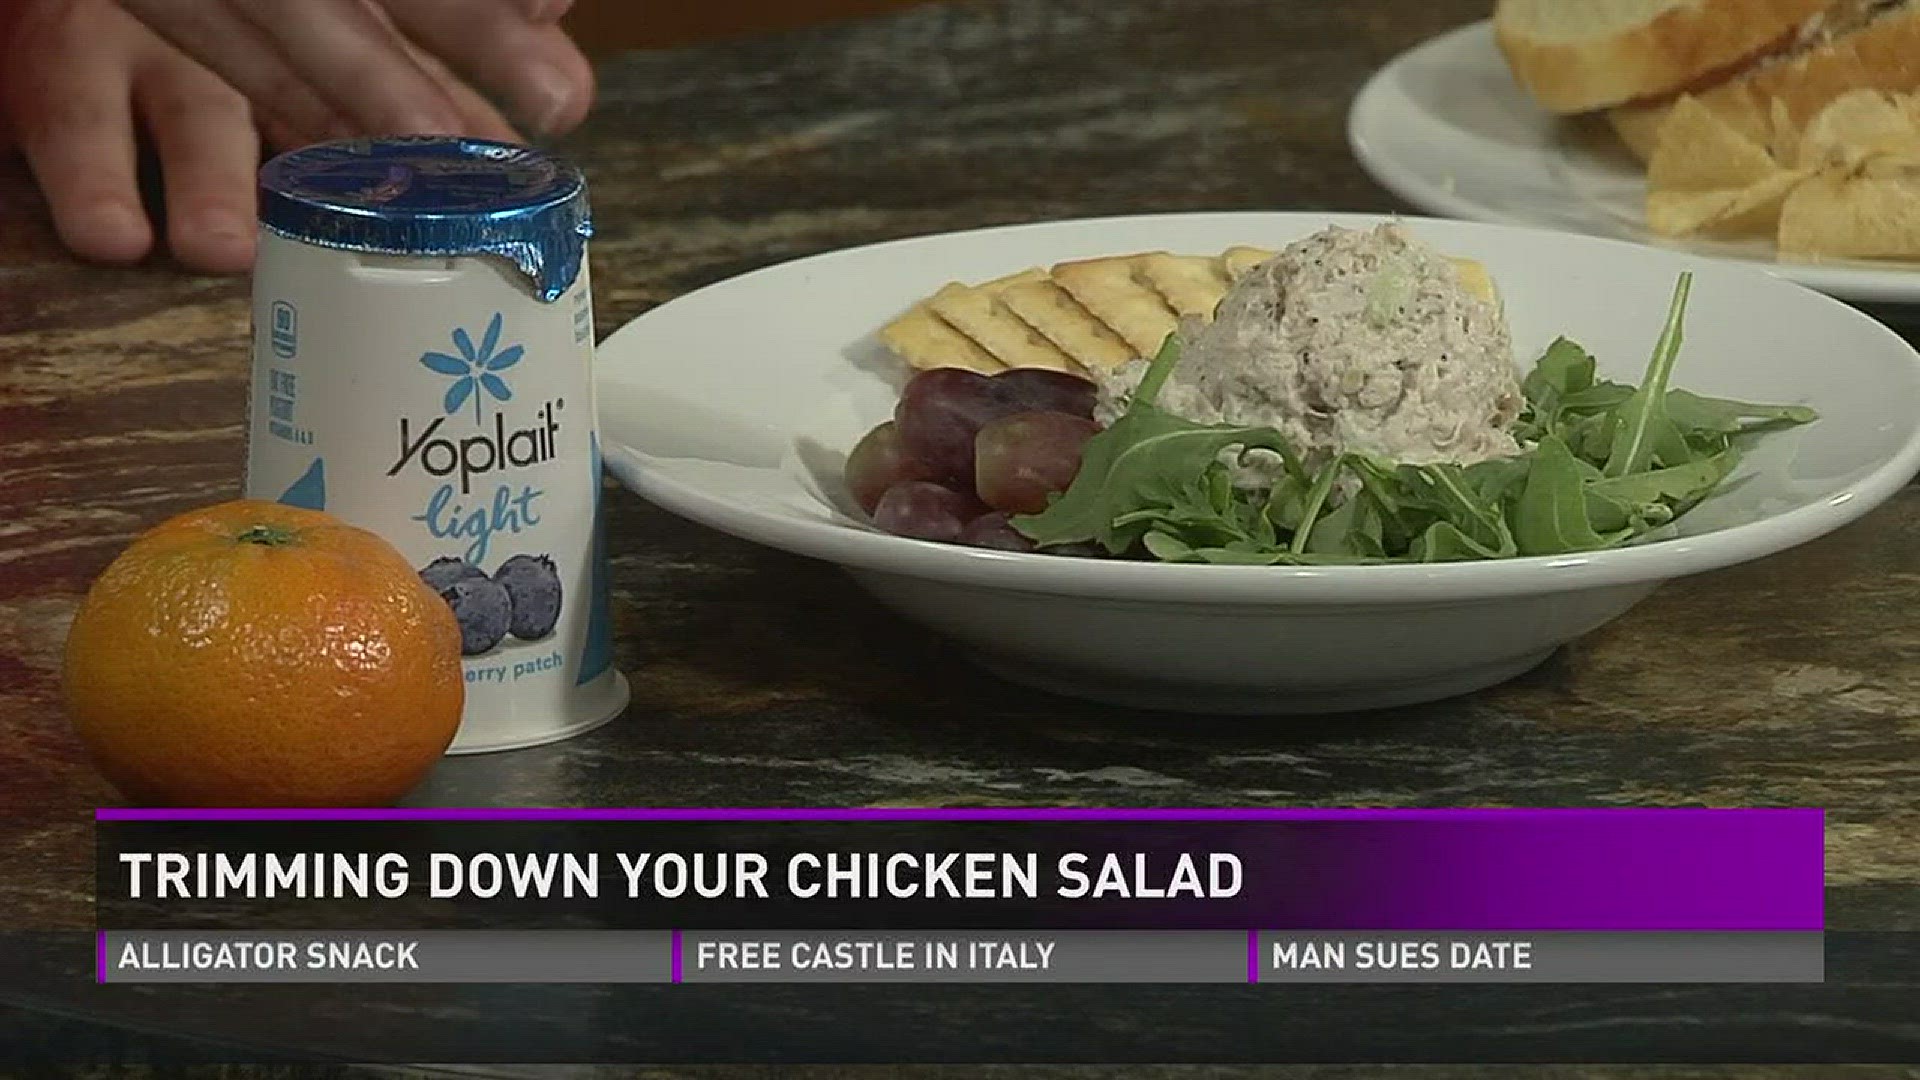 May 17, 2017: Louise Scruggs, a clinical dietitian from UT Medical Center, shares ways to lighten up your lunch.